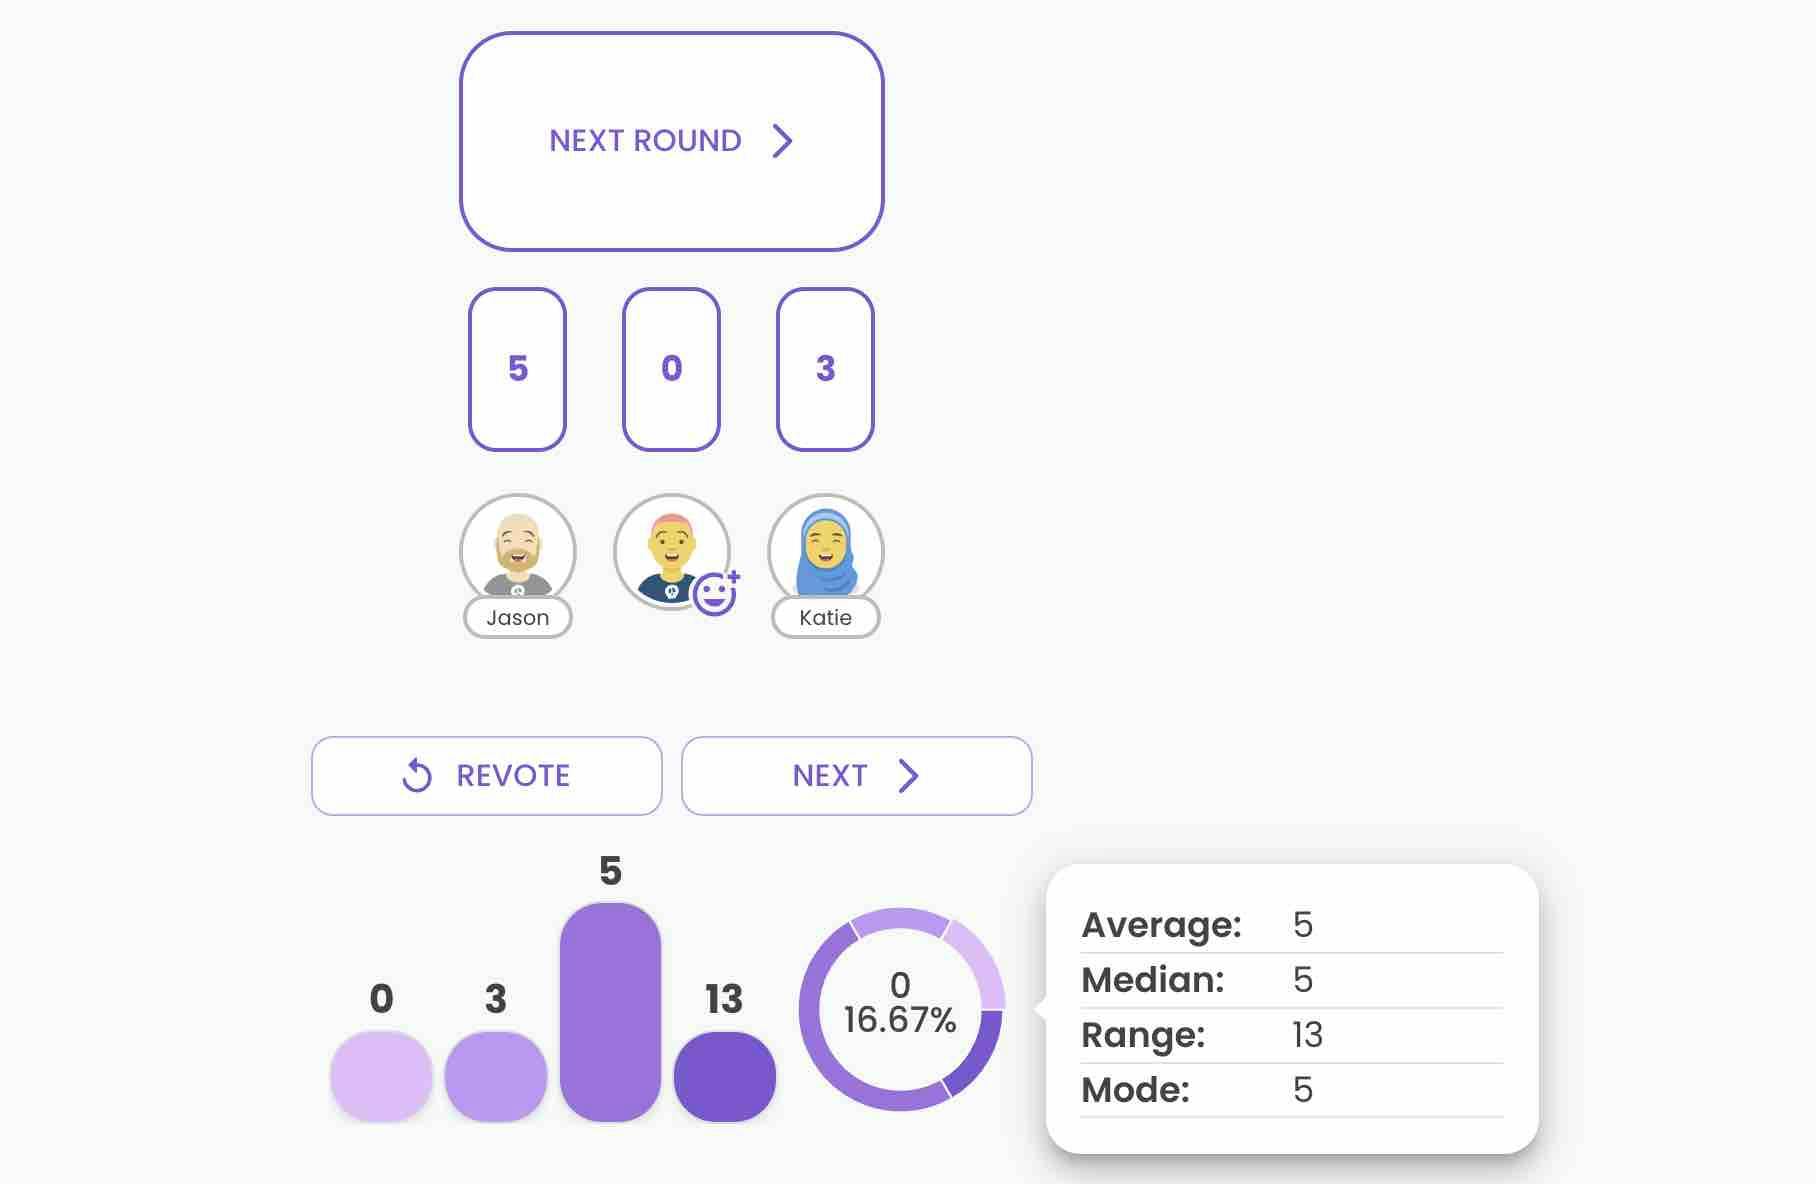 Planning Poker voting statistics. The average, median, range, and mode are displayed.